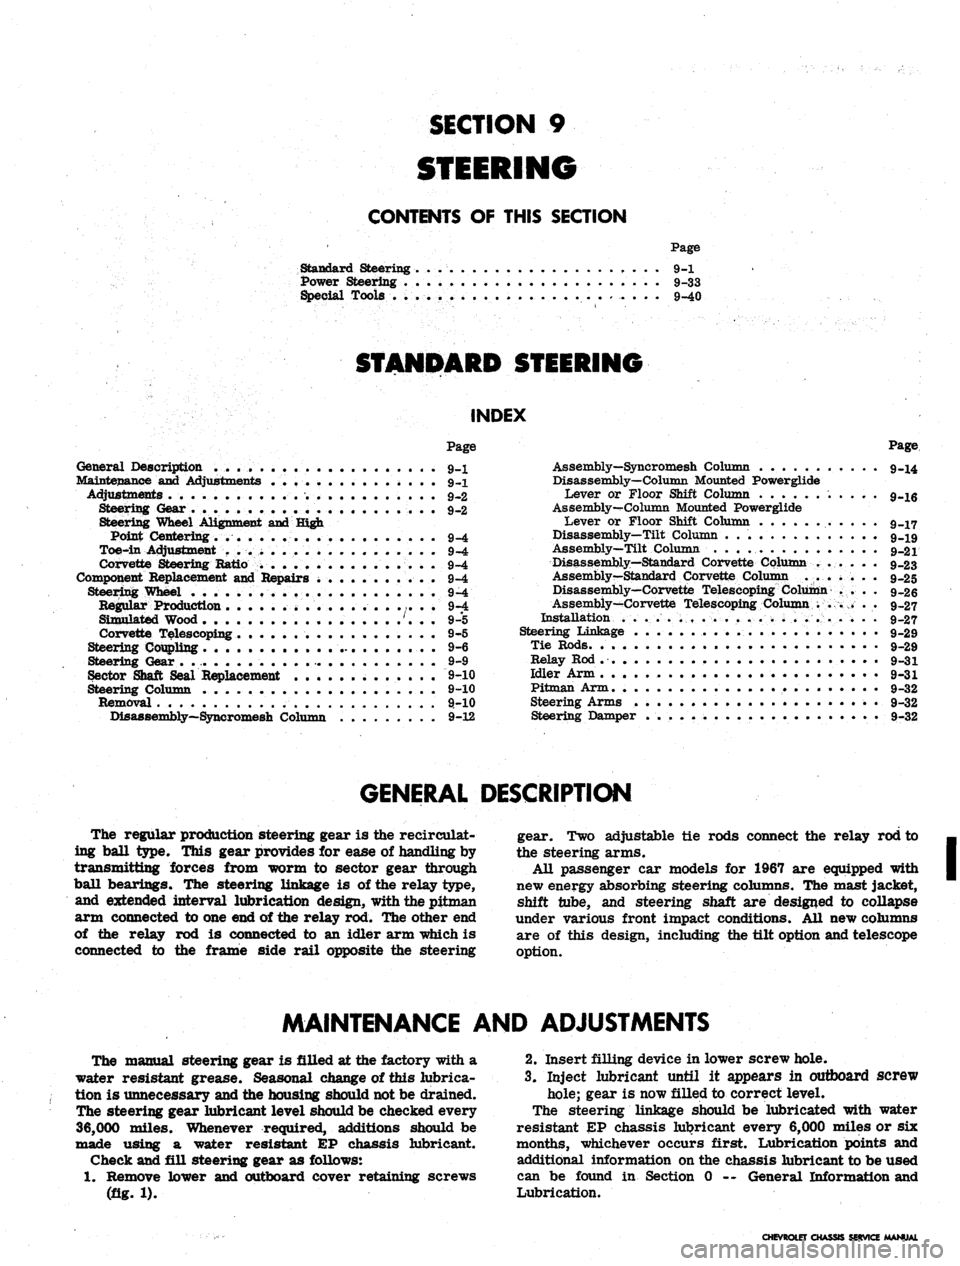 CHEVROLET CAMARO 1967 1.G Chassis Workshop Manual 
SECTION
 9

STEERING

CONTENTS
 OF
 THIS SECTION

Standard Steering
 9-1

Power Steering
 9-33

Special Tools
 9-40

STANDARD STEERING

INDEX

Page

General Description 9.x

Maintenance and Adjustmen